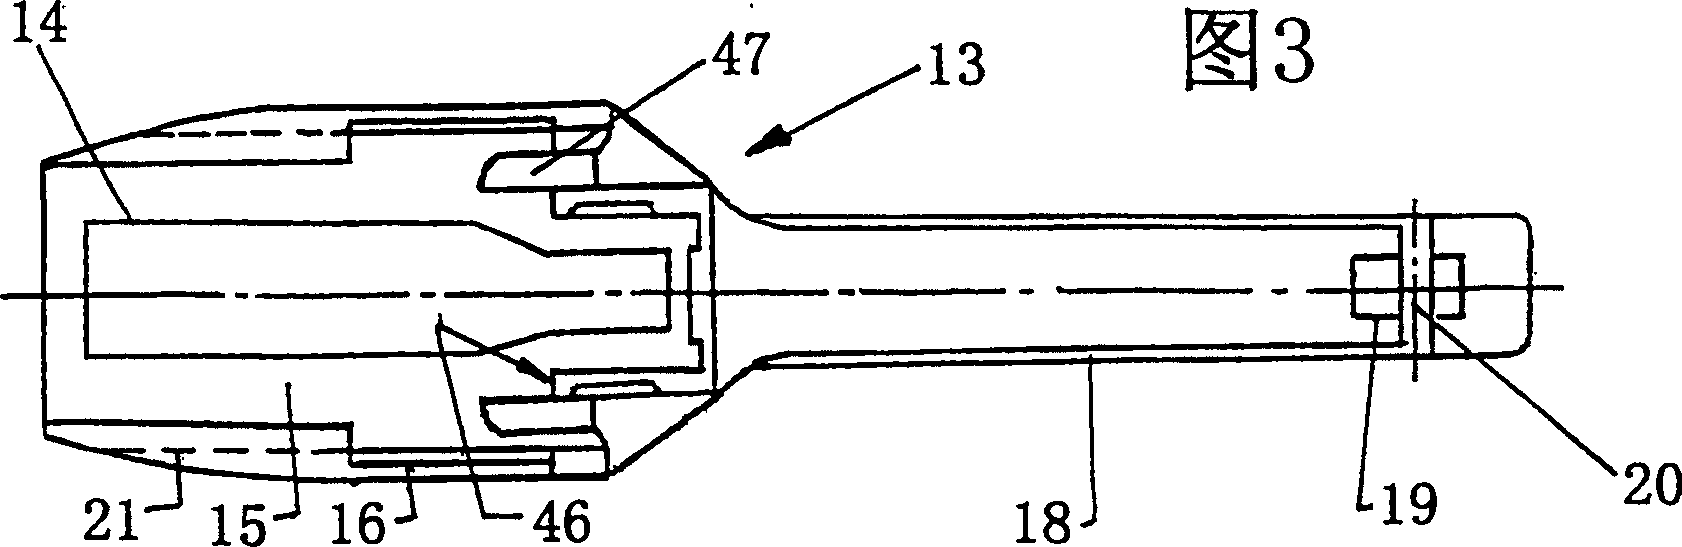 Device for controlling lace-up device on shoes and shoes including the device